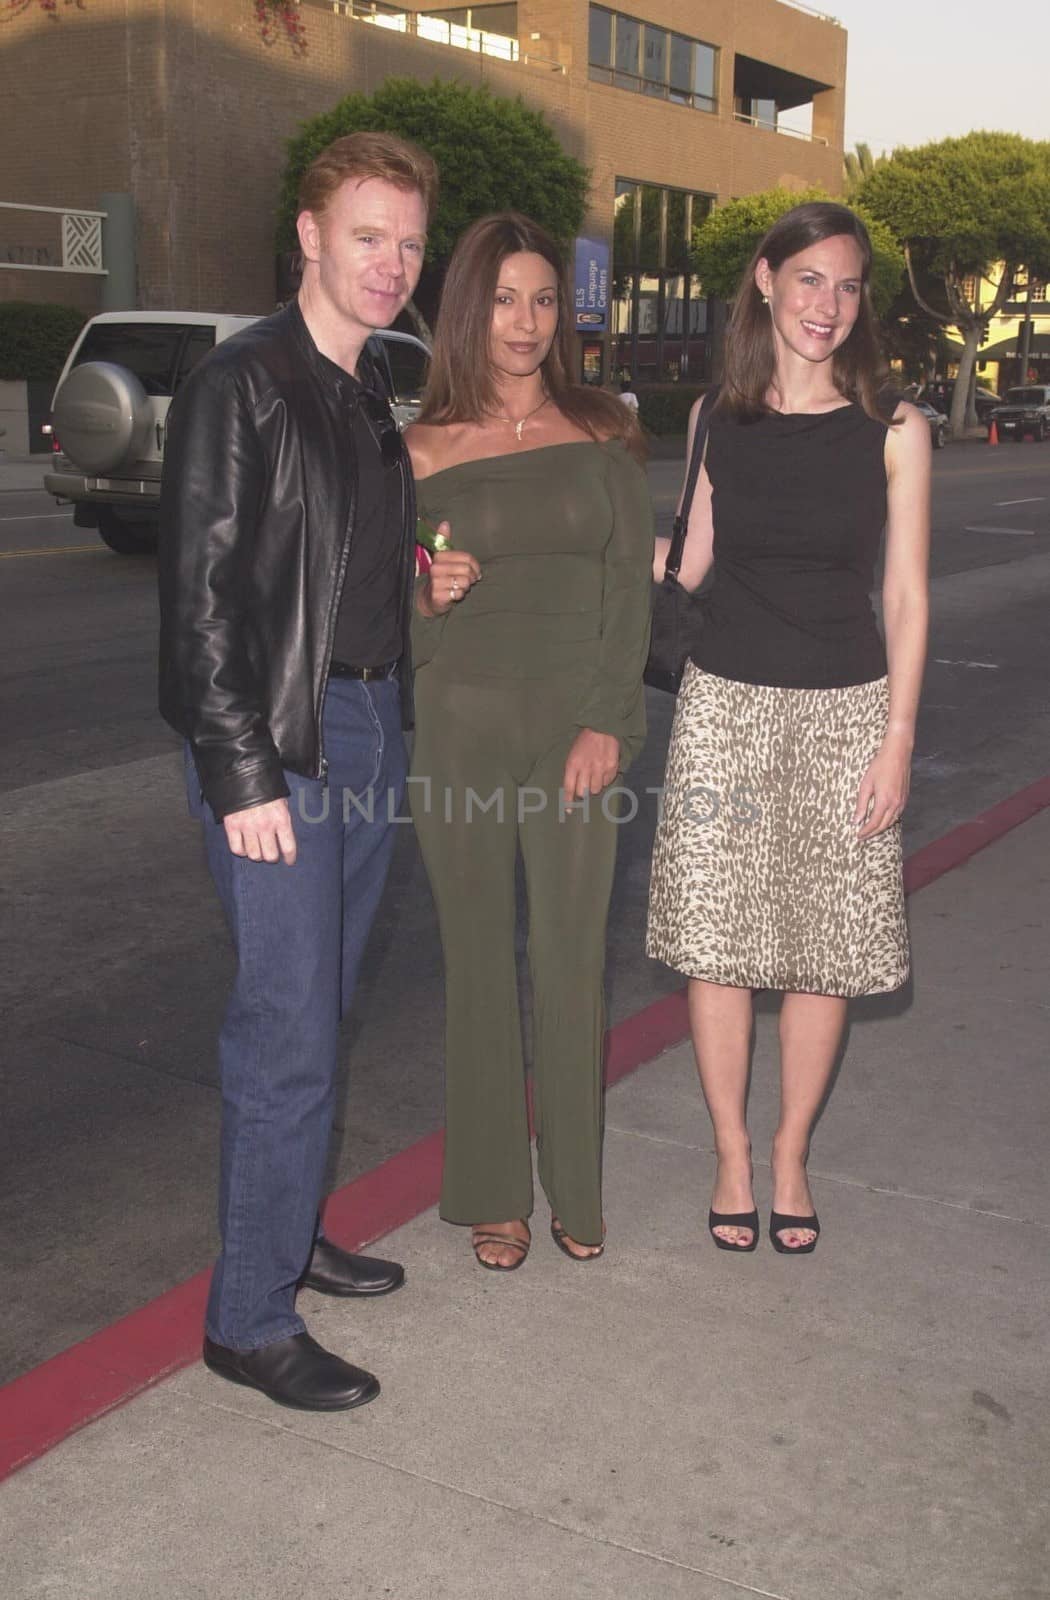 David Caruso and Margret Buckley and friend at the premiere of "Steal This Movie" in Santa Monica. 08-15-00